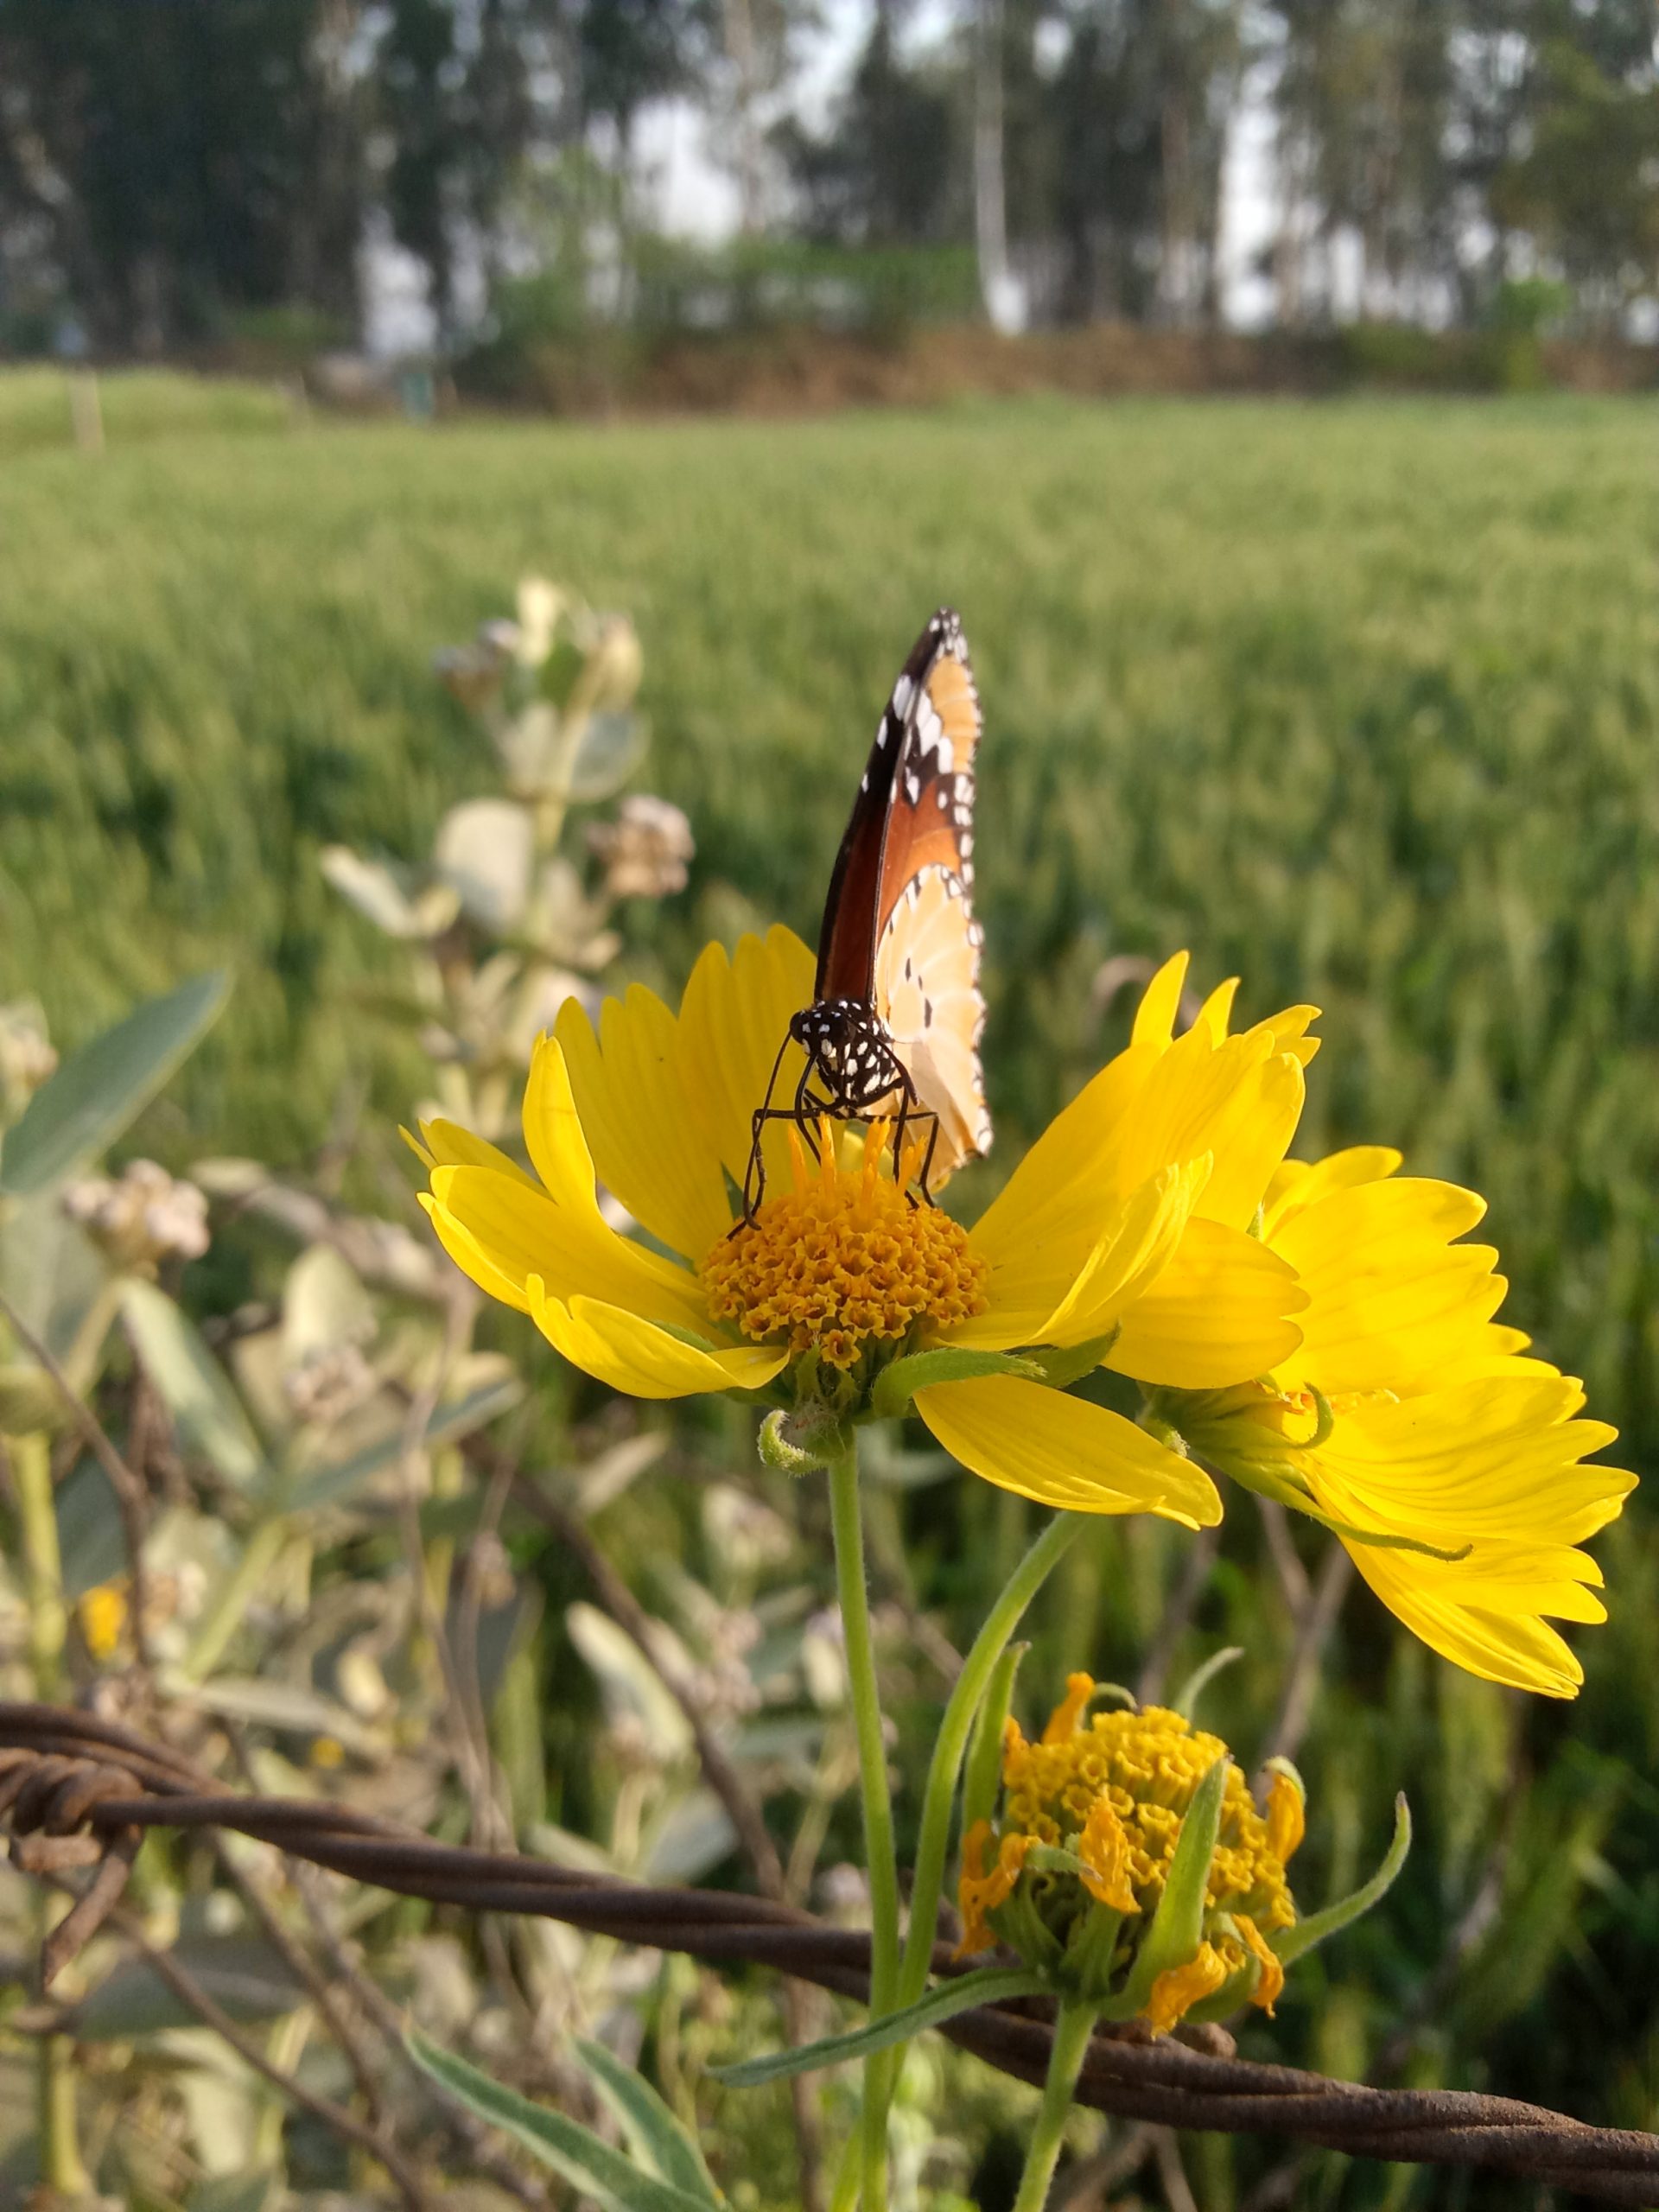 A butterfly on flowers